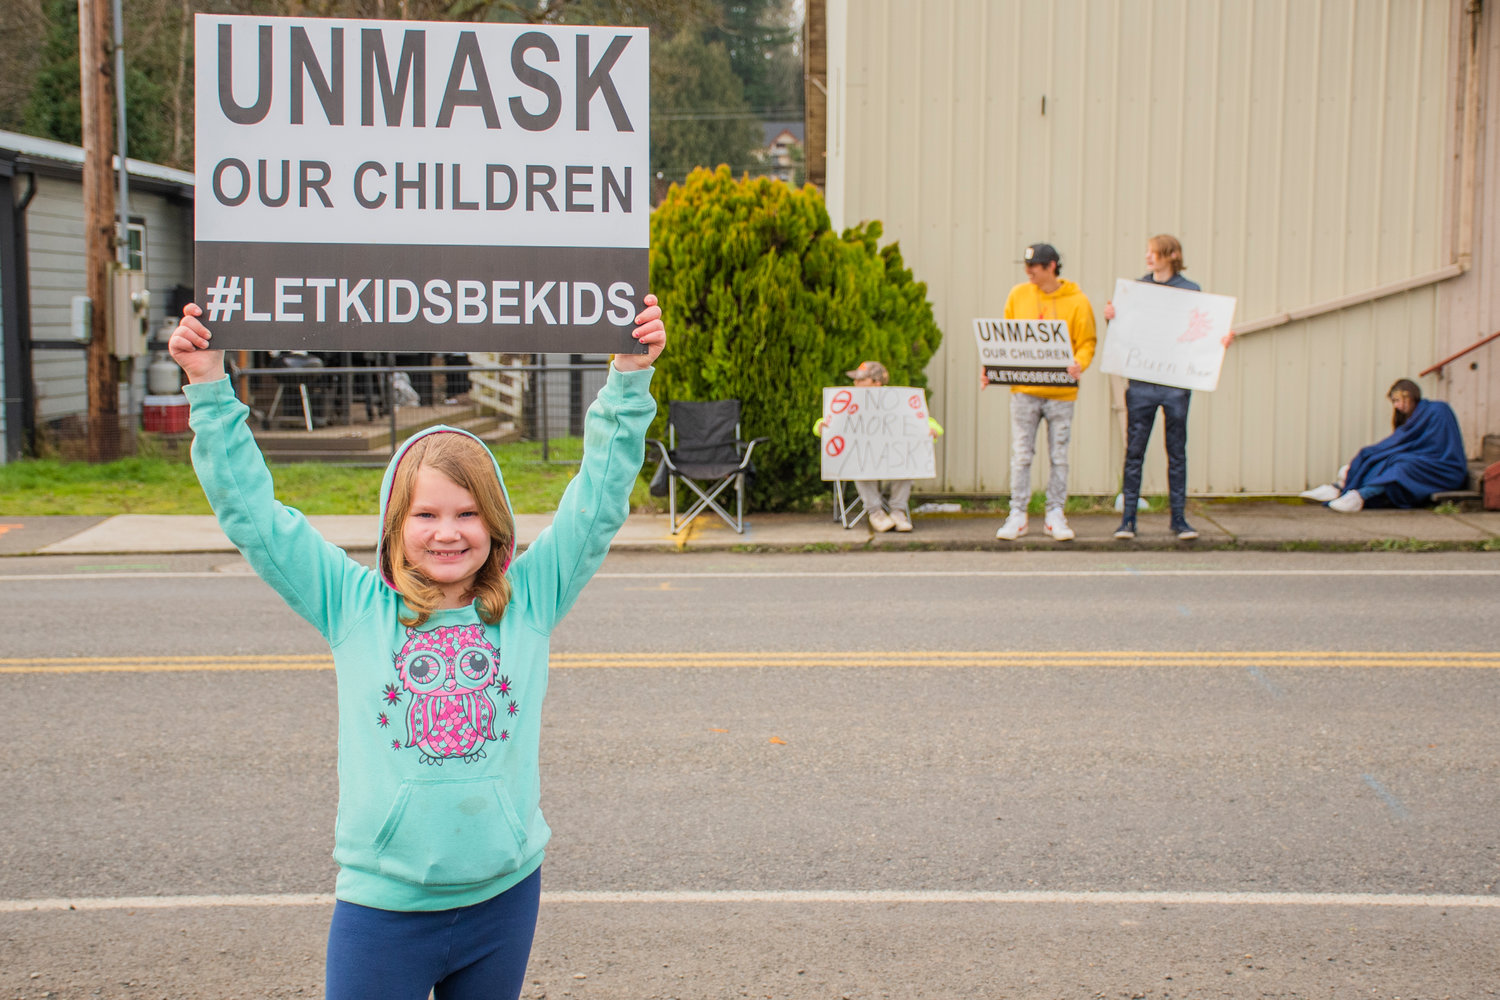 Clair Root, 7, stands with a sign along Southwest Kerron Street as students protest the mask mandate Tuesday afternoon in Winlock.